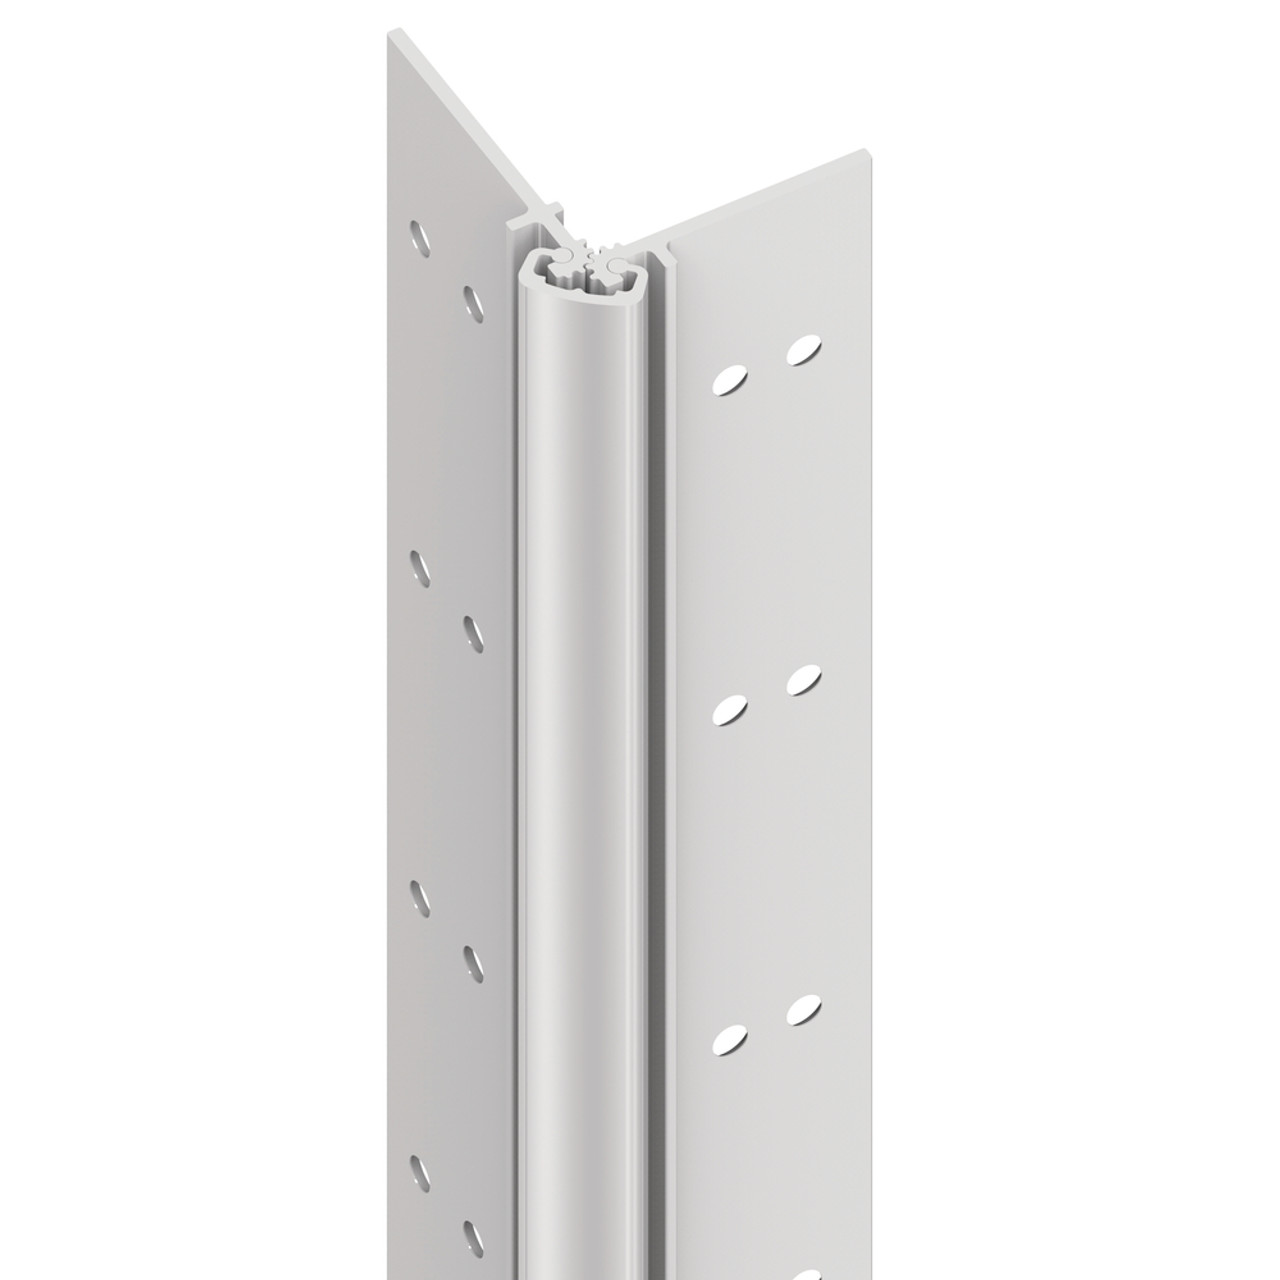 Electrically Modified Hinge, Mental Health Safety Products